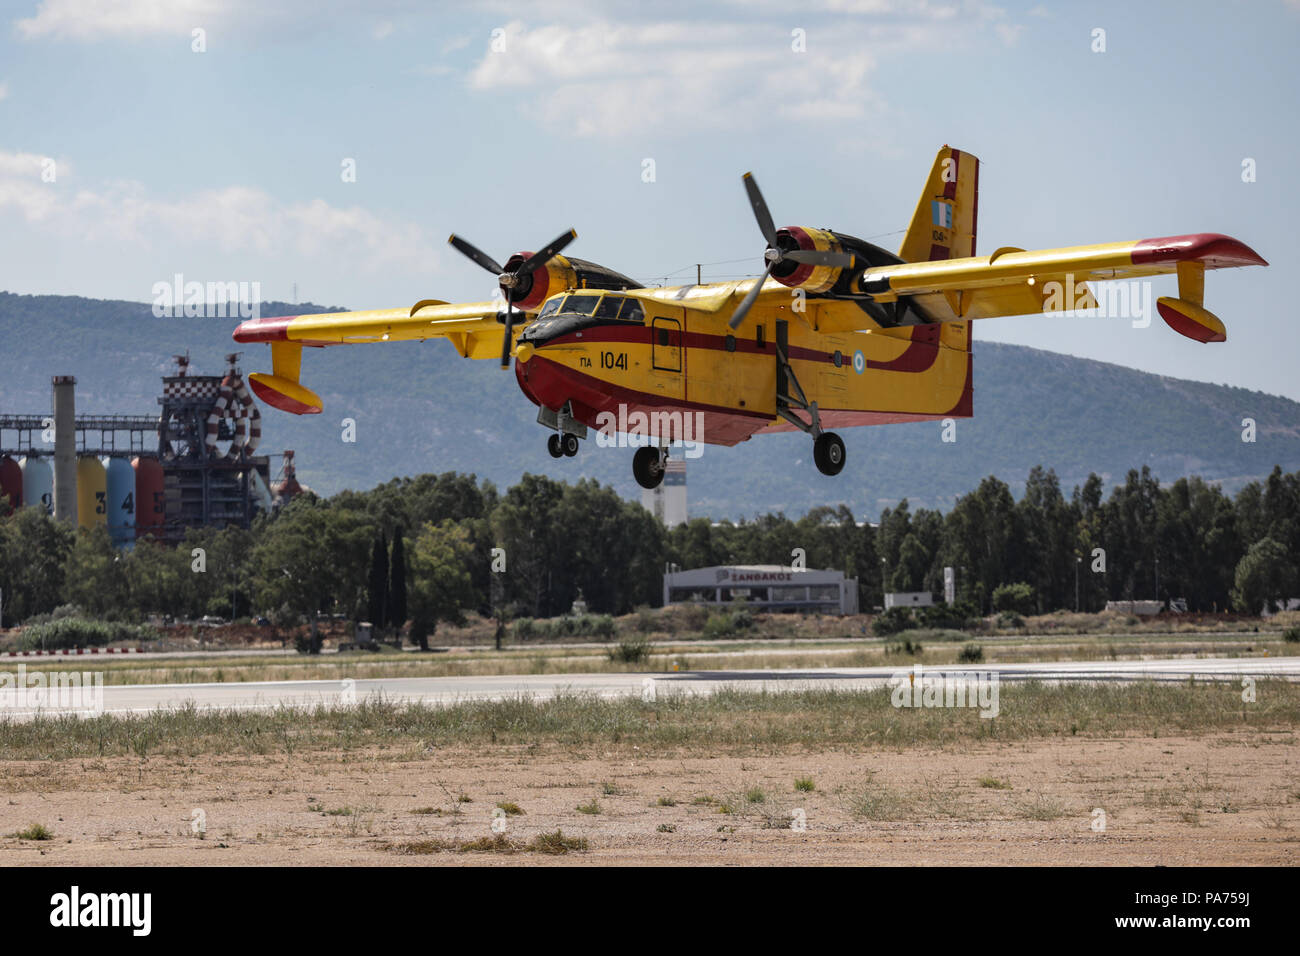 Athens. 20th July, 2018. Photo taken on July 20, 2018 shows a firefighting aircraft of 355 Tactical Transport Squadron at the Elefsina Air Base, Athens, Greece. The 355 Tactical Transport Squadron was established in 1947 to fight wildfires. Credit: Lefteris Partsalis/Xinhua/Alamy Live News Stock Photo